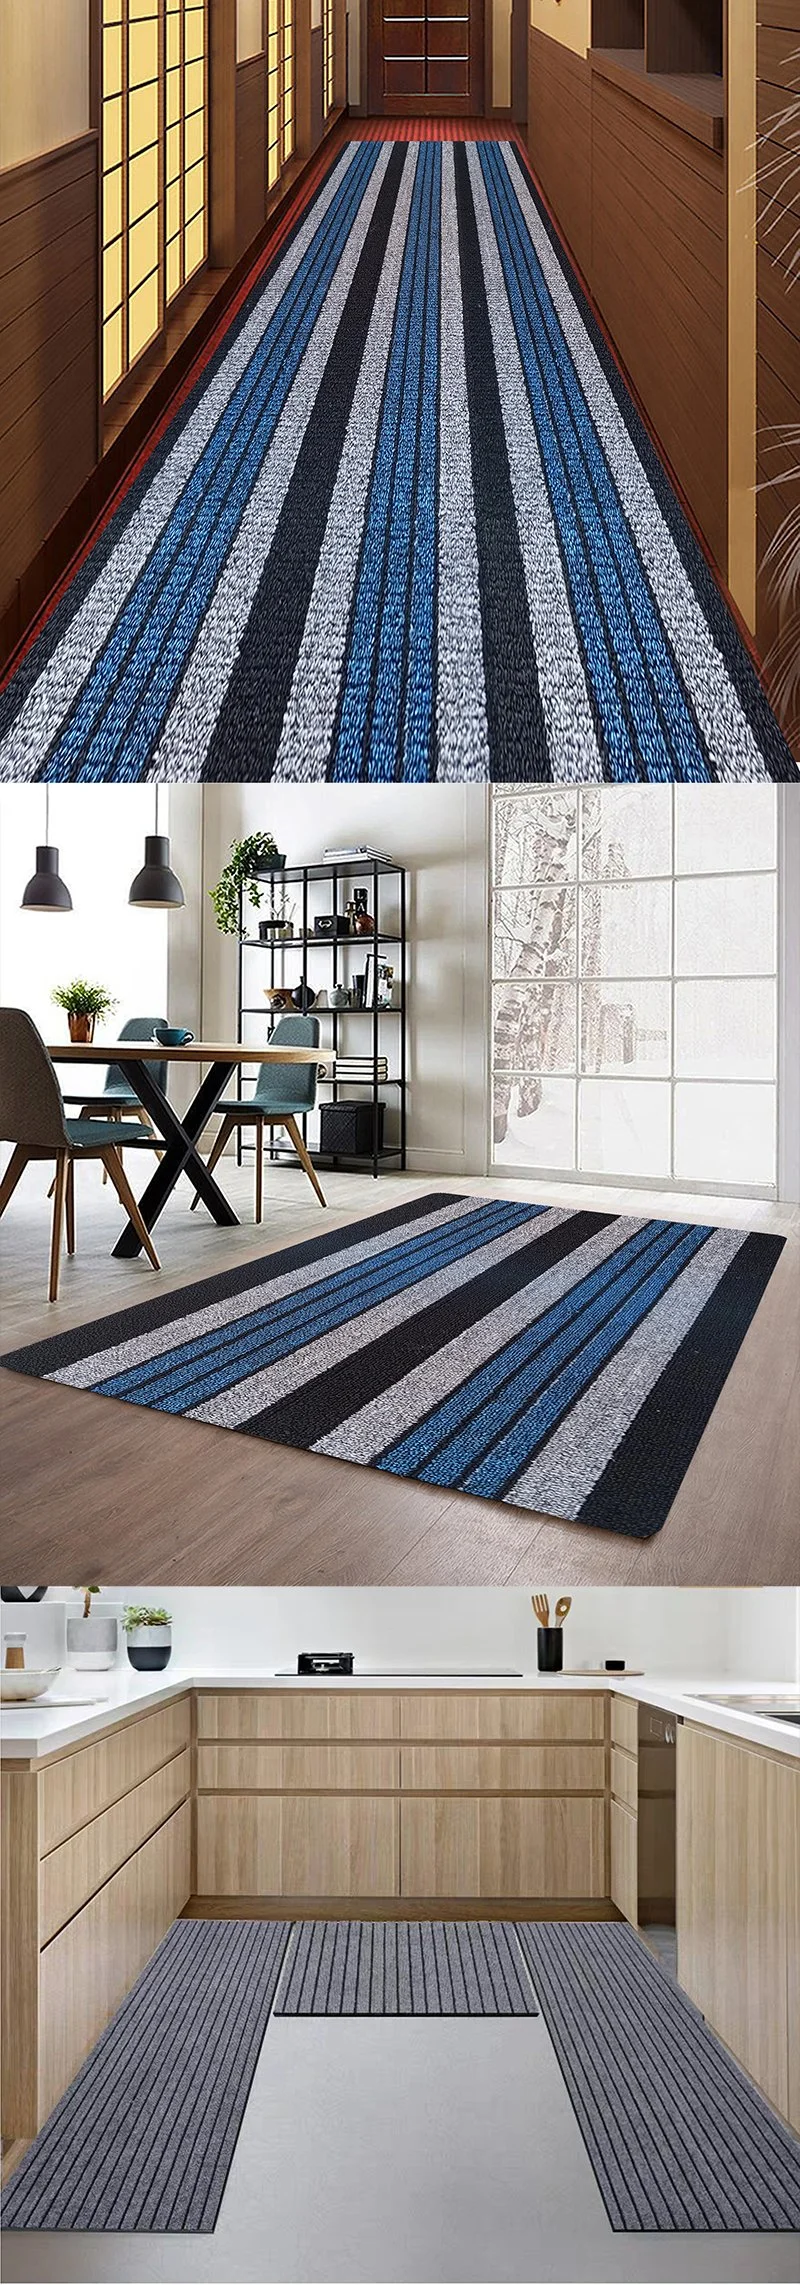 Modern Luxury Style Washable Digital Printed Factory Price Carpet Suitable for Living Room Bed Room